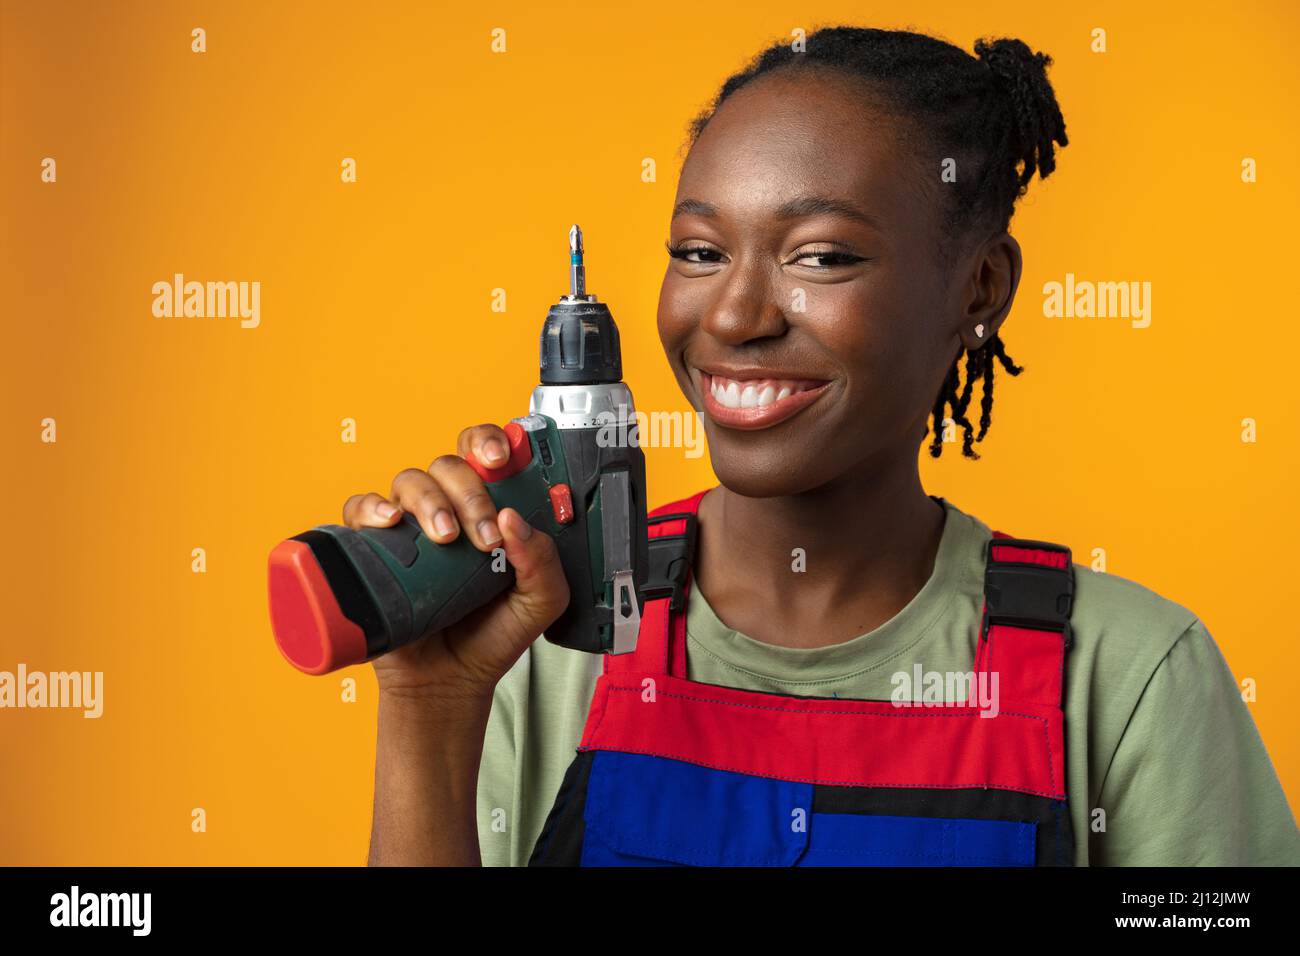 Black African American female model in uniform holding a screwdriver repair tool against yellow background Stock Photo